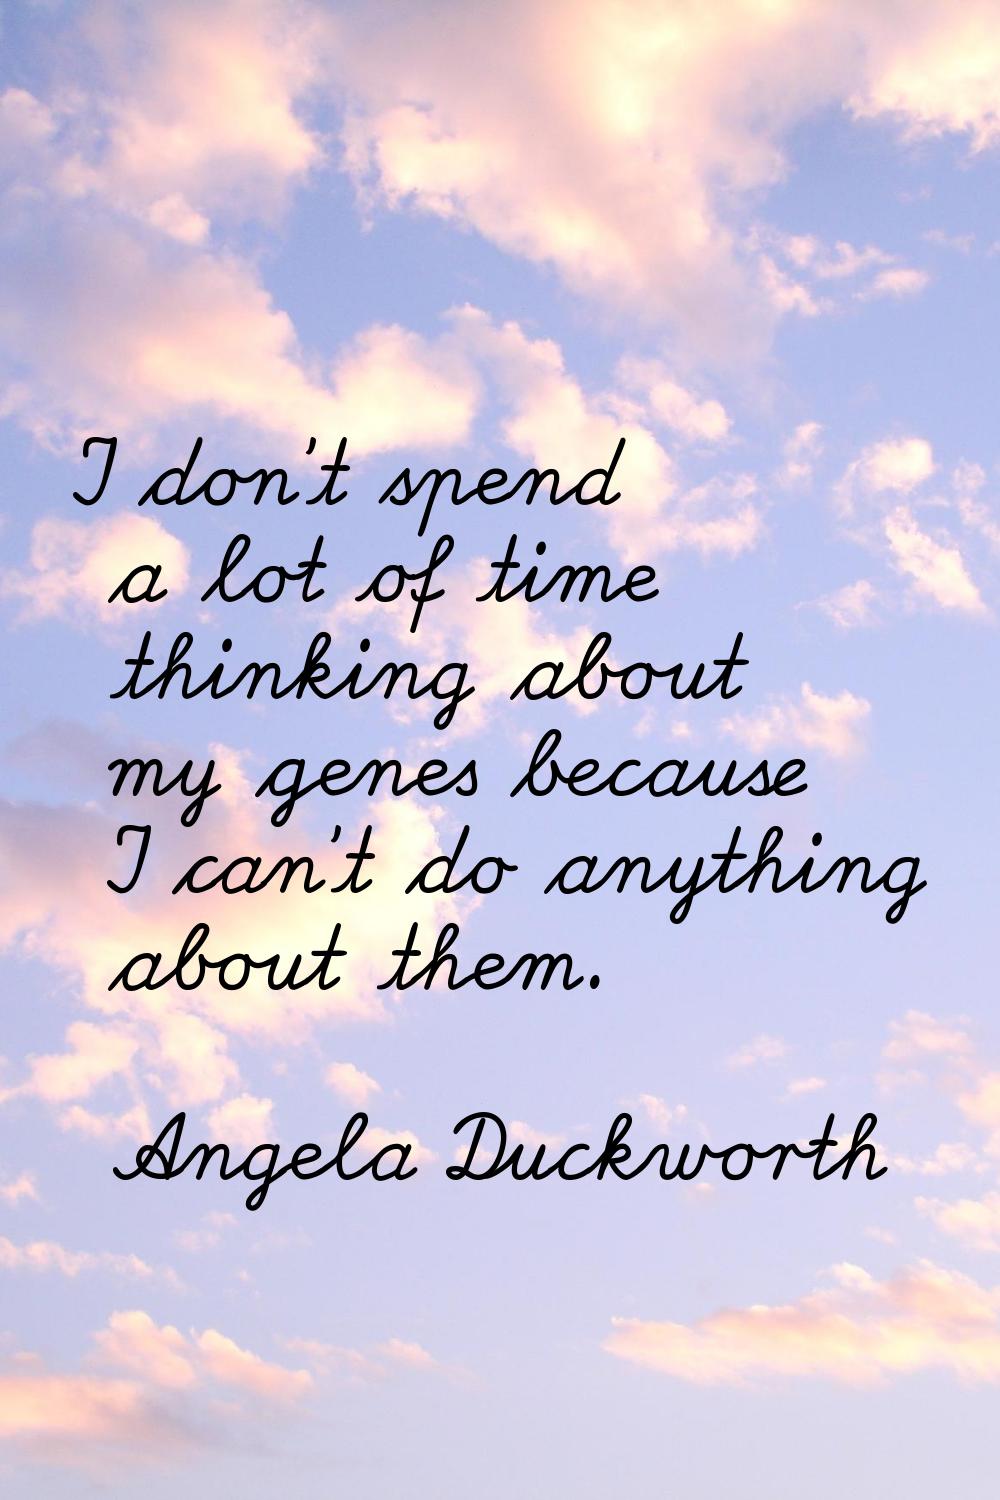 I don't spend a lot of time thinking about my genes because I can't do anything about them.